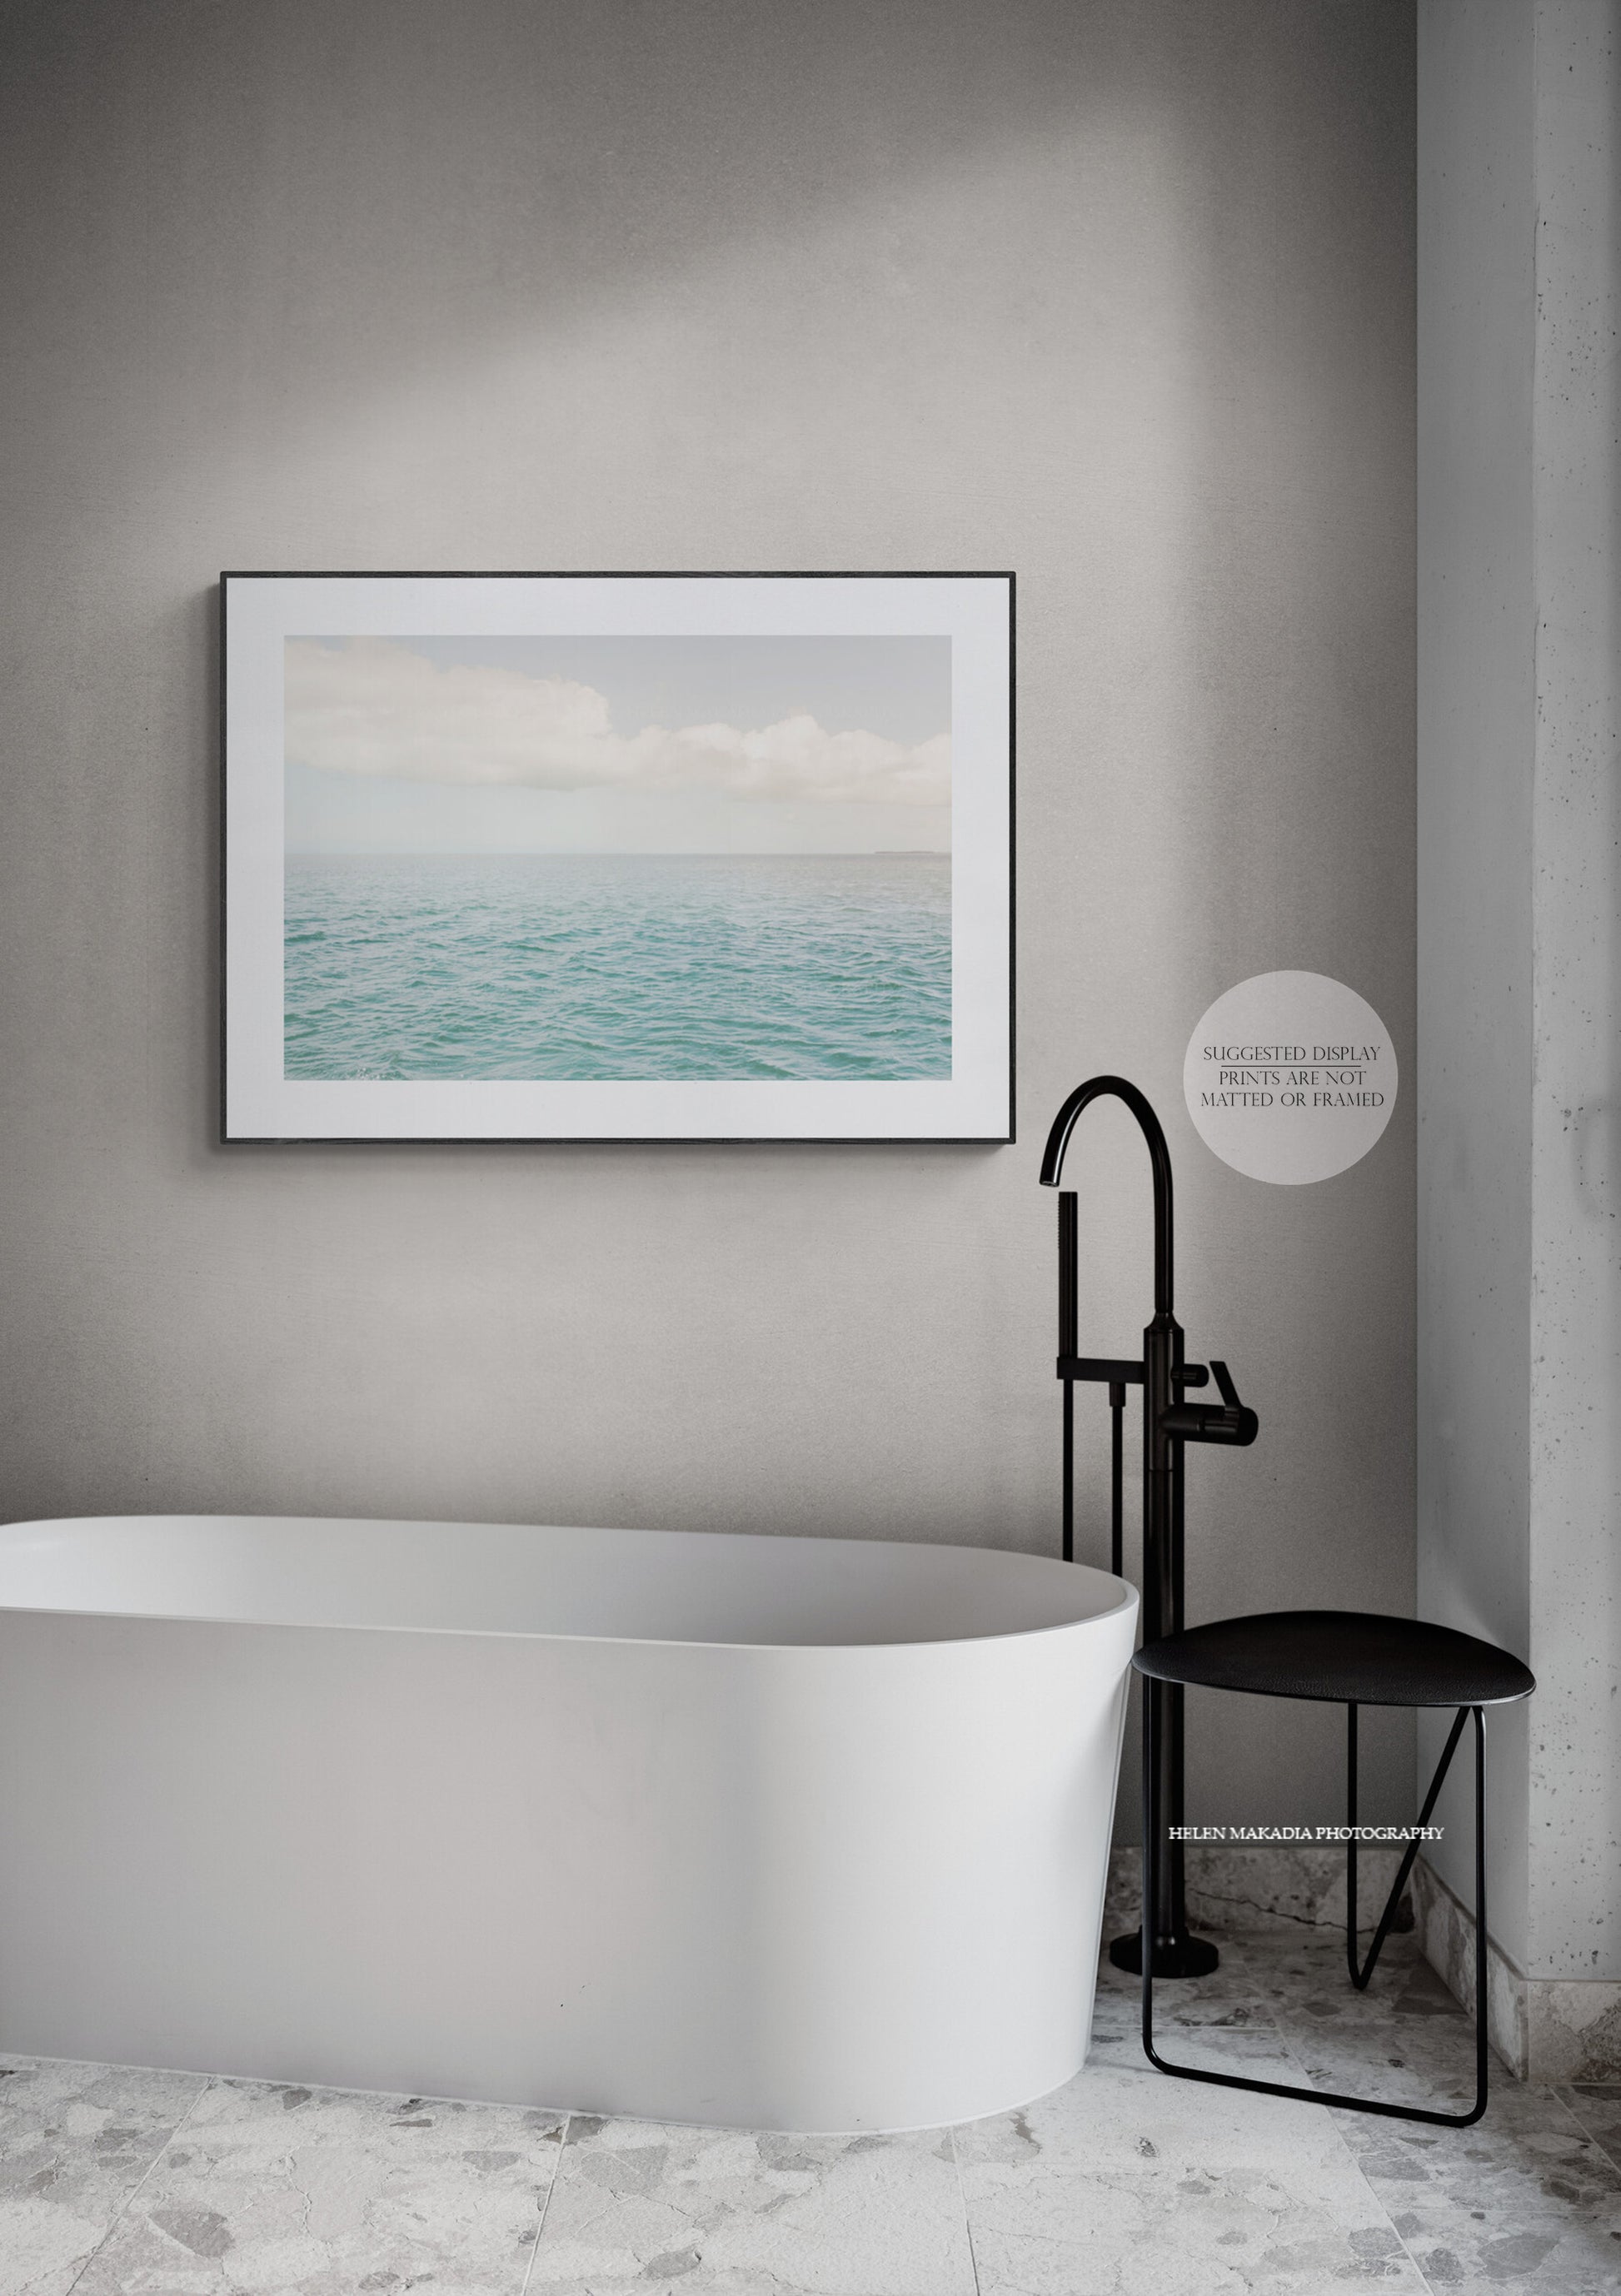 Photograph of Open Ocean Waters of Key West Florida, framed and hung over a bathtub as bathroom wall art